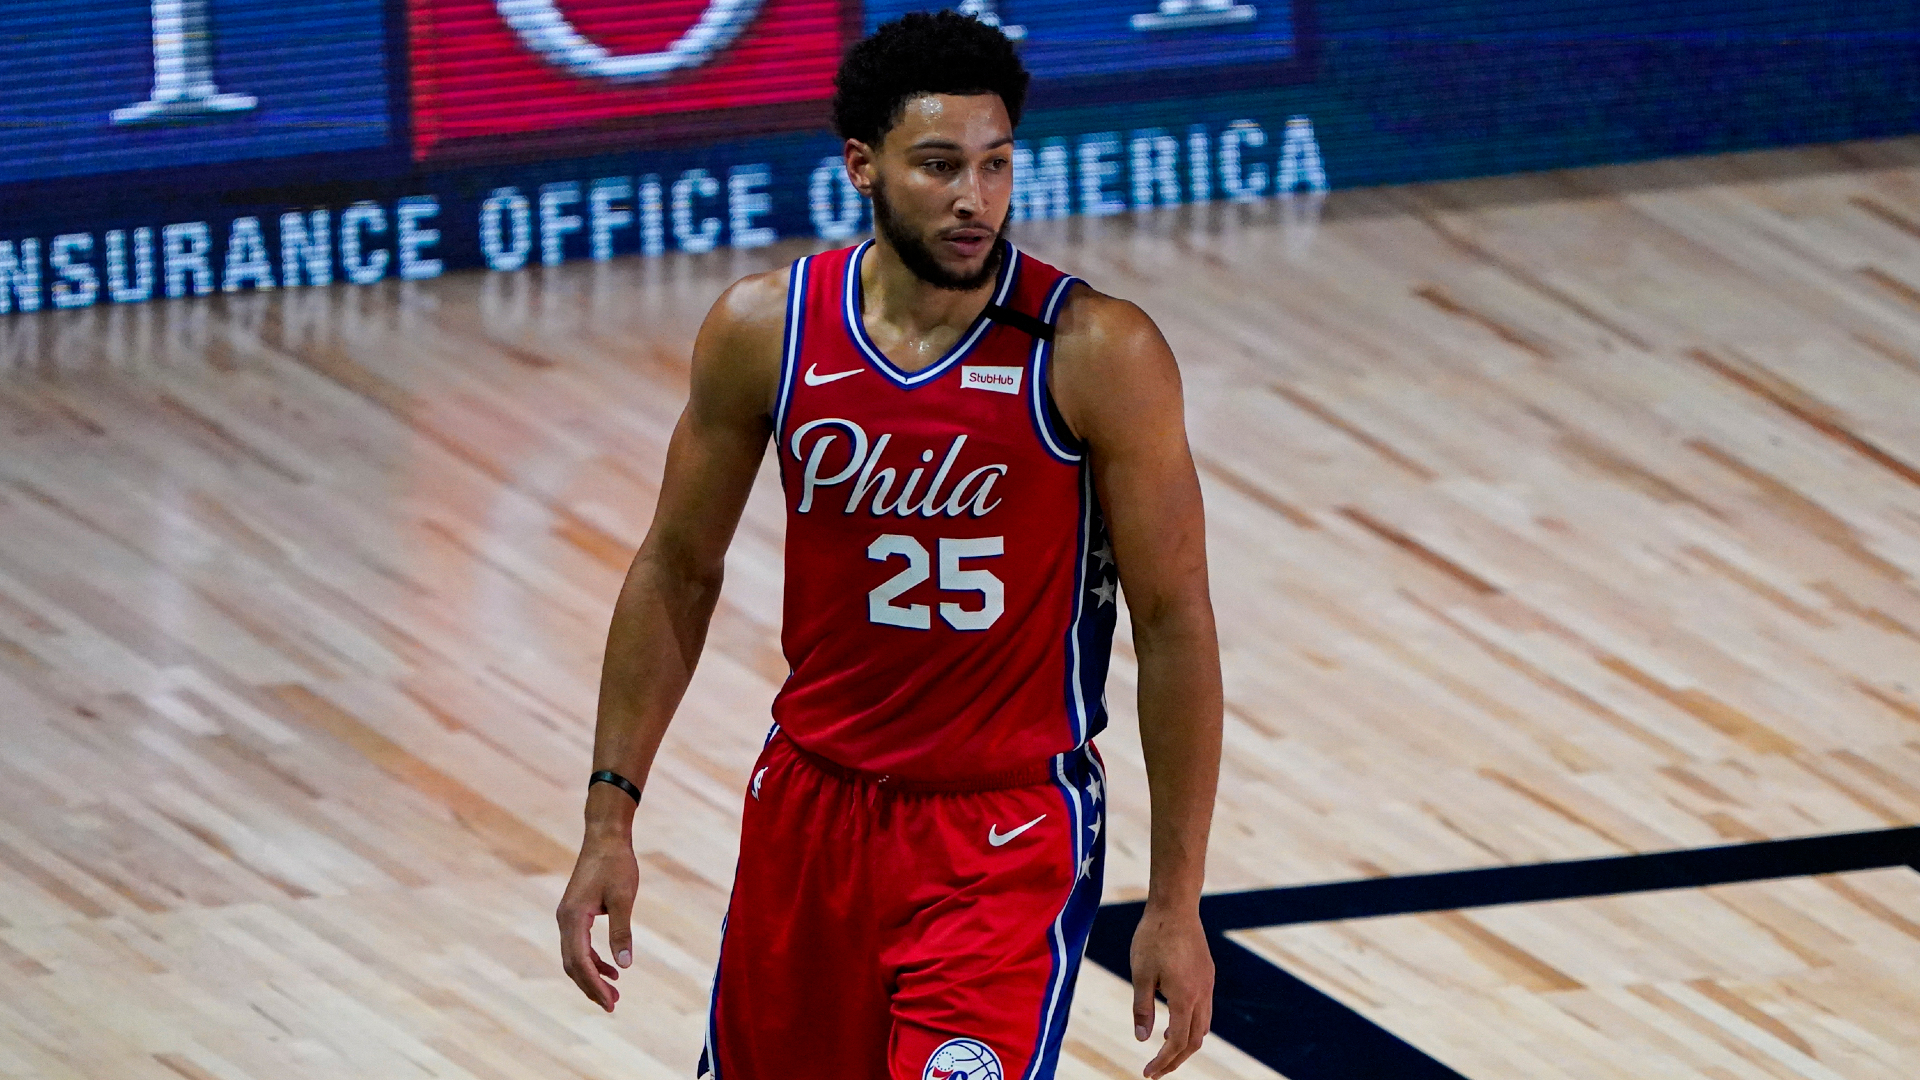 The Philadelphia 76ers' Ben Simmons suffered a knee injury on Wednesday.